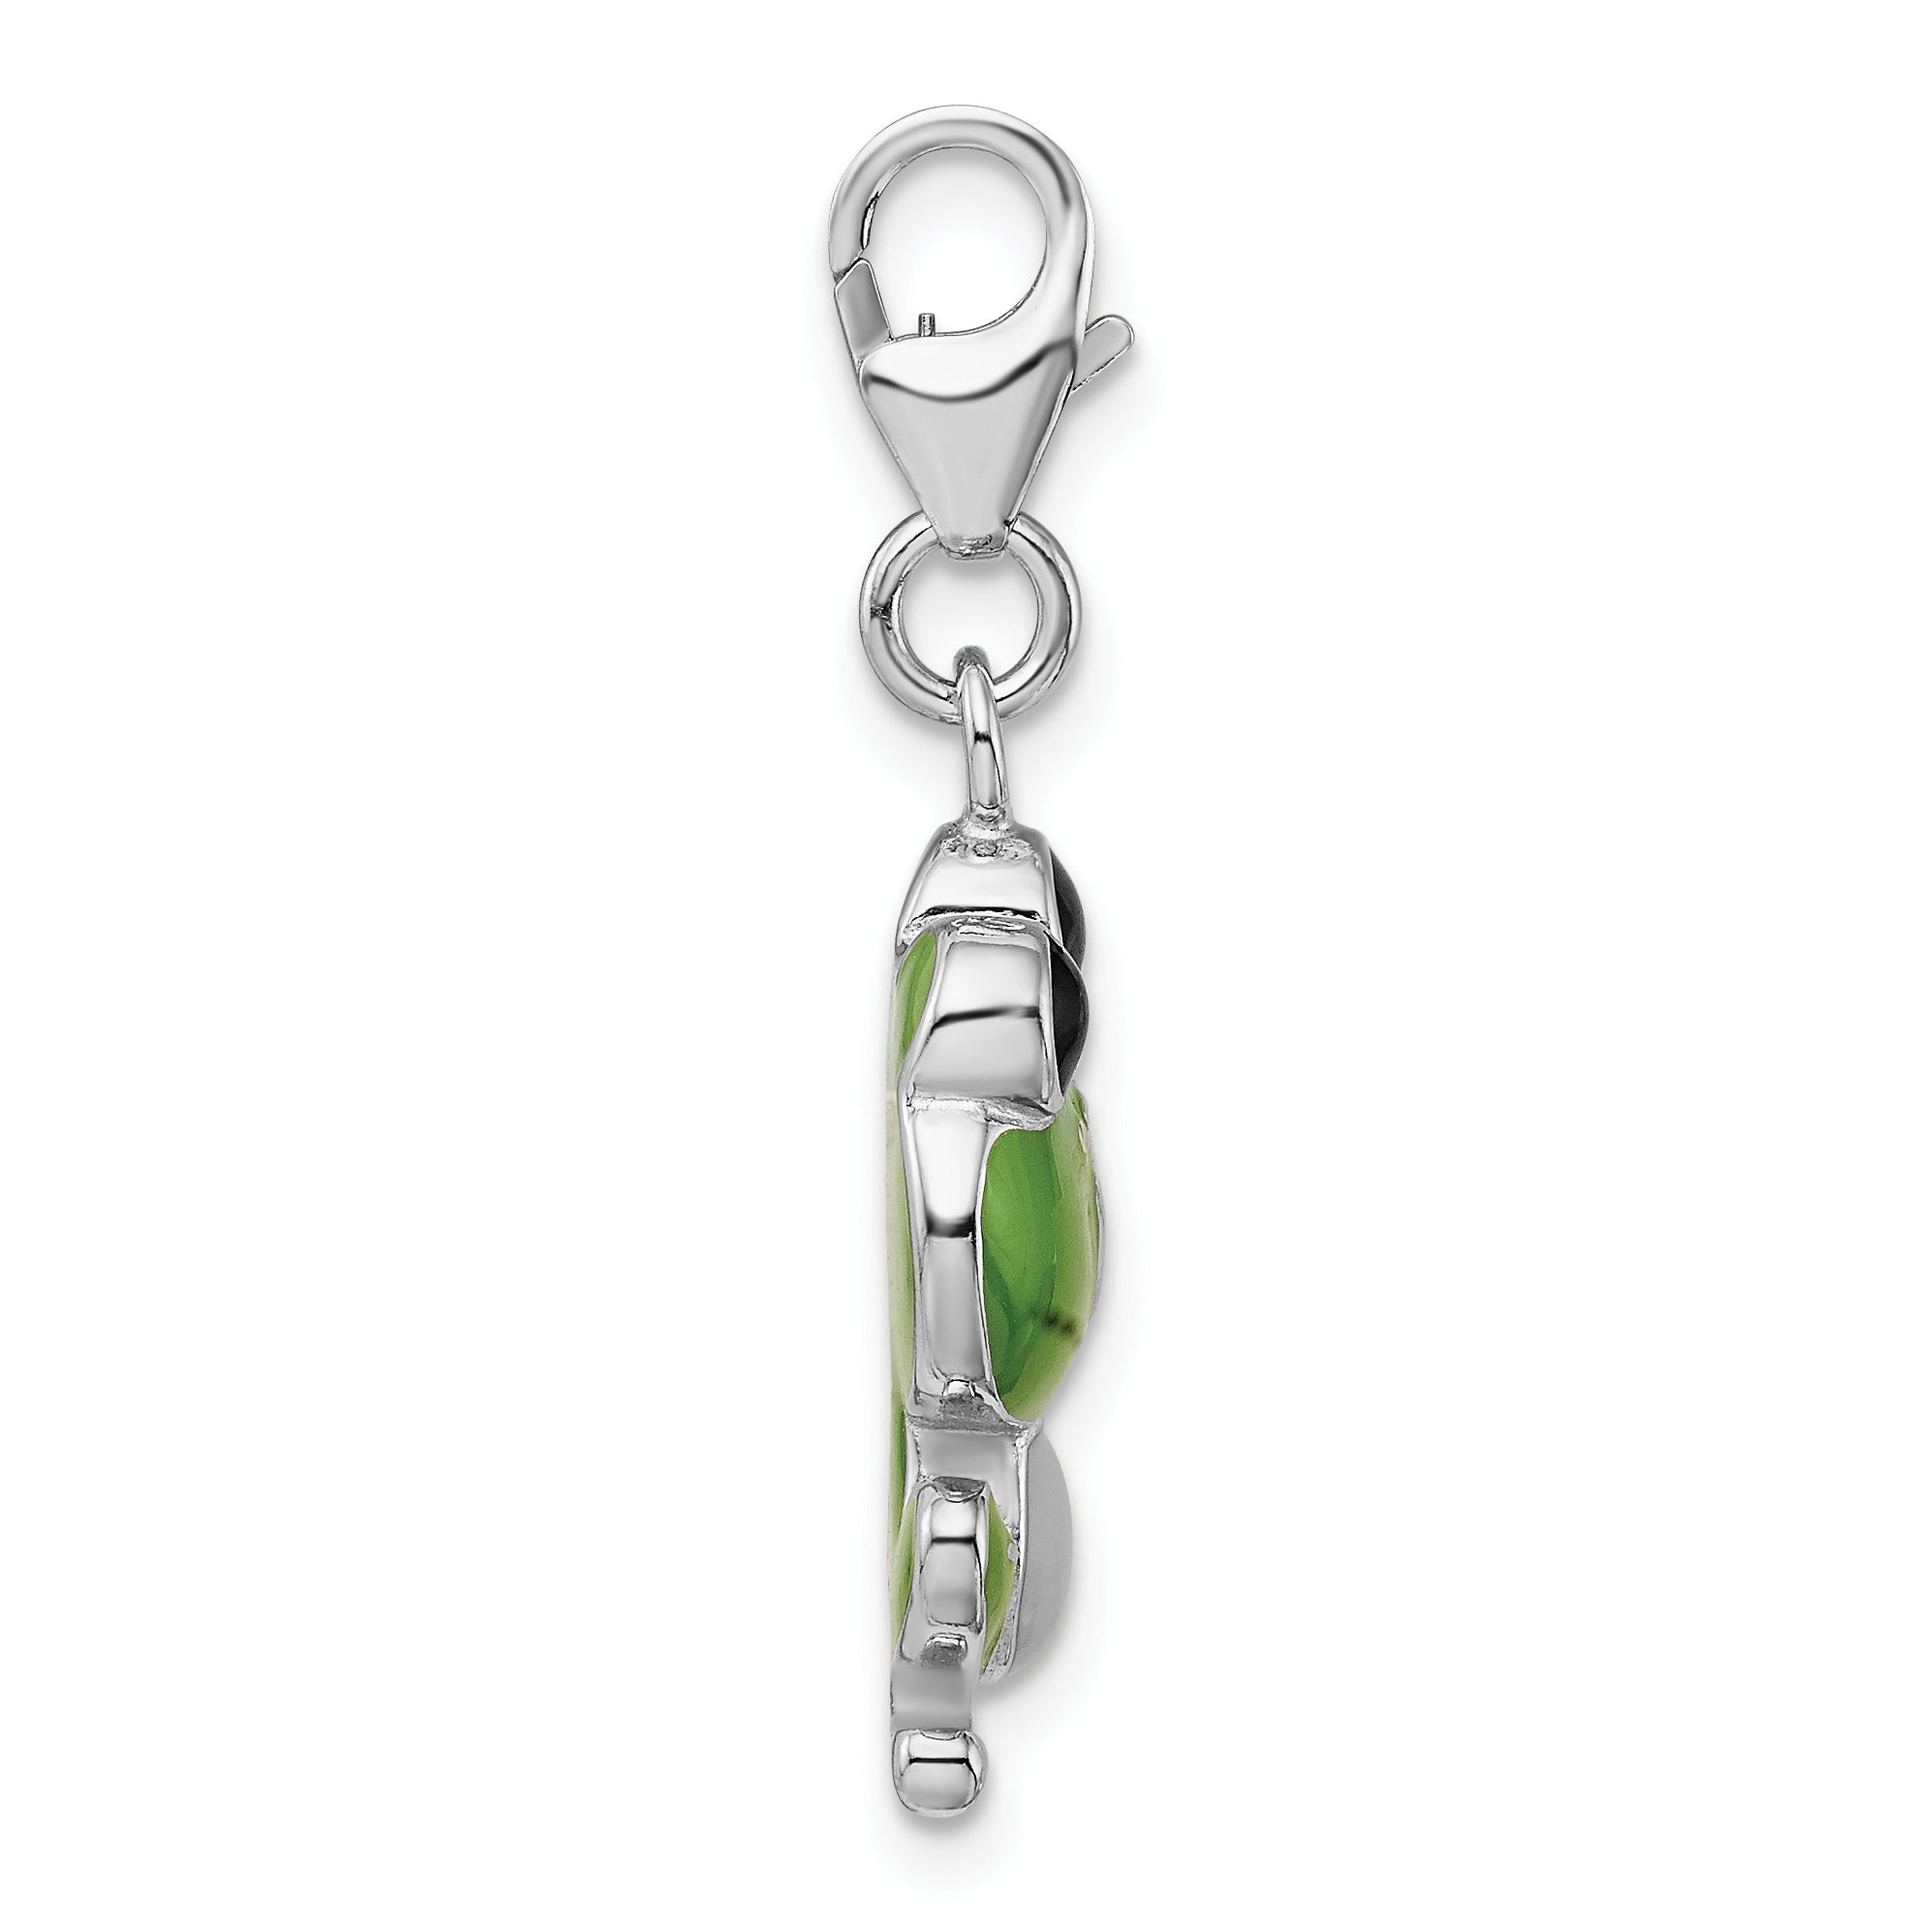 Amore La Vita Sterling Silver Rhodium-plated Polished Enameled Frog Charm with Fancy Lobster Clasp